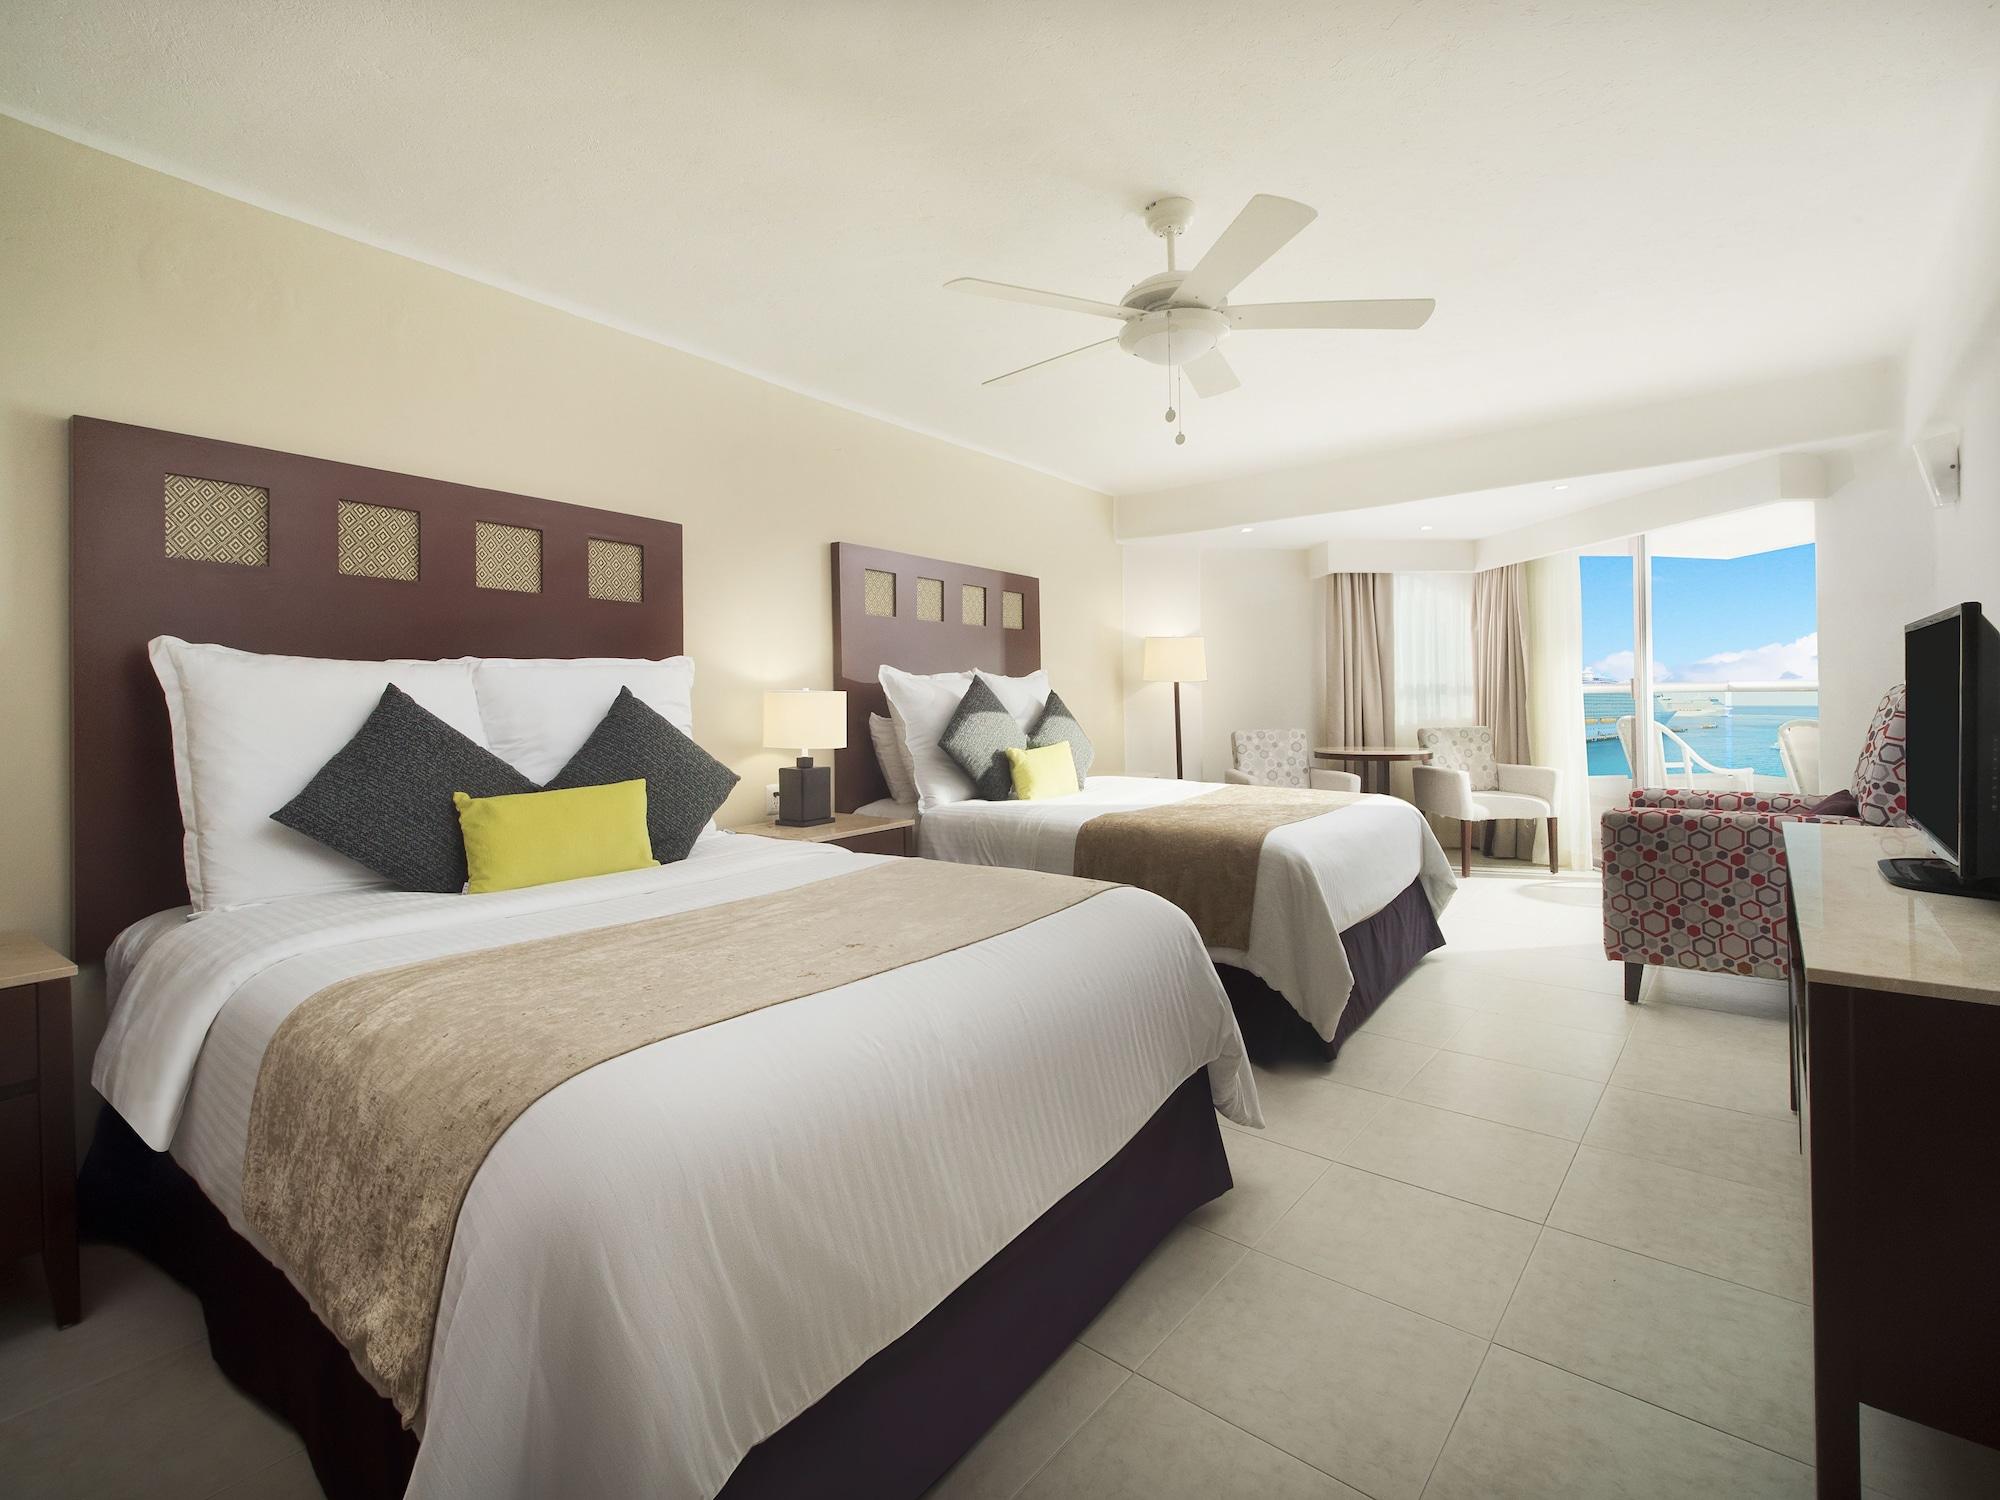 HOTEL EL CID LA CEIBA BEACH (ADULTS ONLY) COZUMEL 4* (Mexico) - from £ 95 |  HOTELMIX